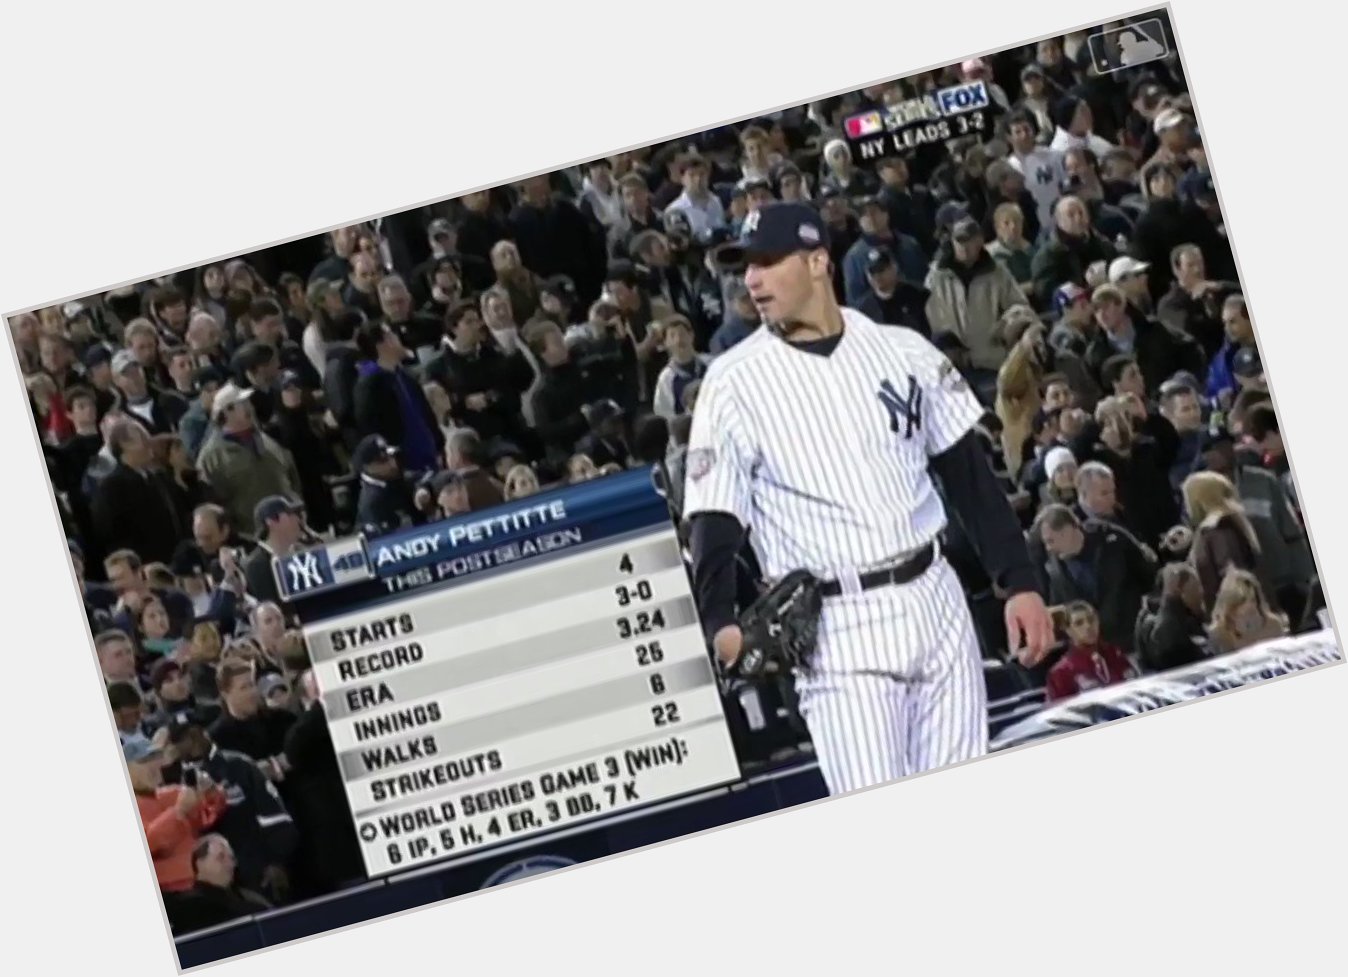 Happy birthday to Andy Pettitte.

His 19 wins are the most in history. 